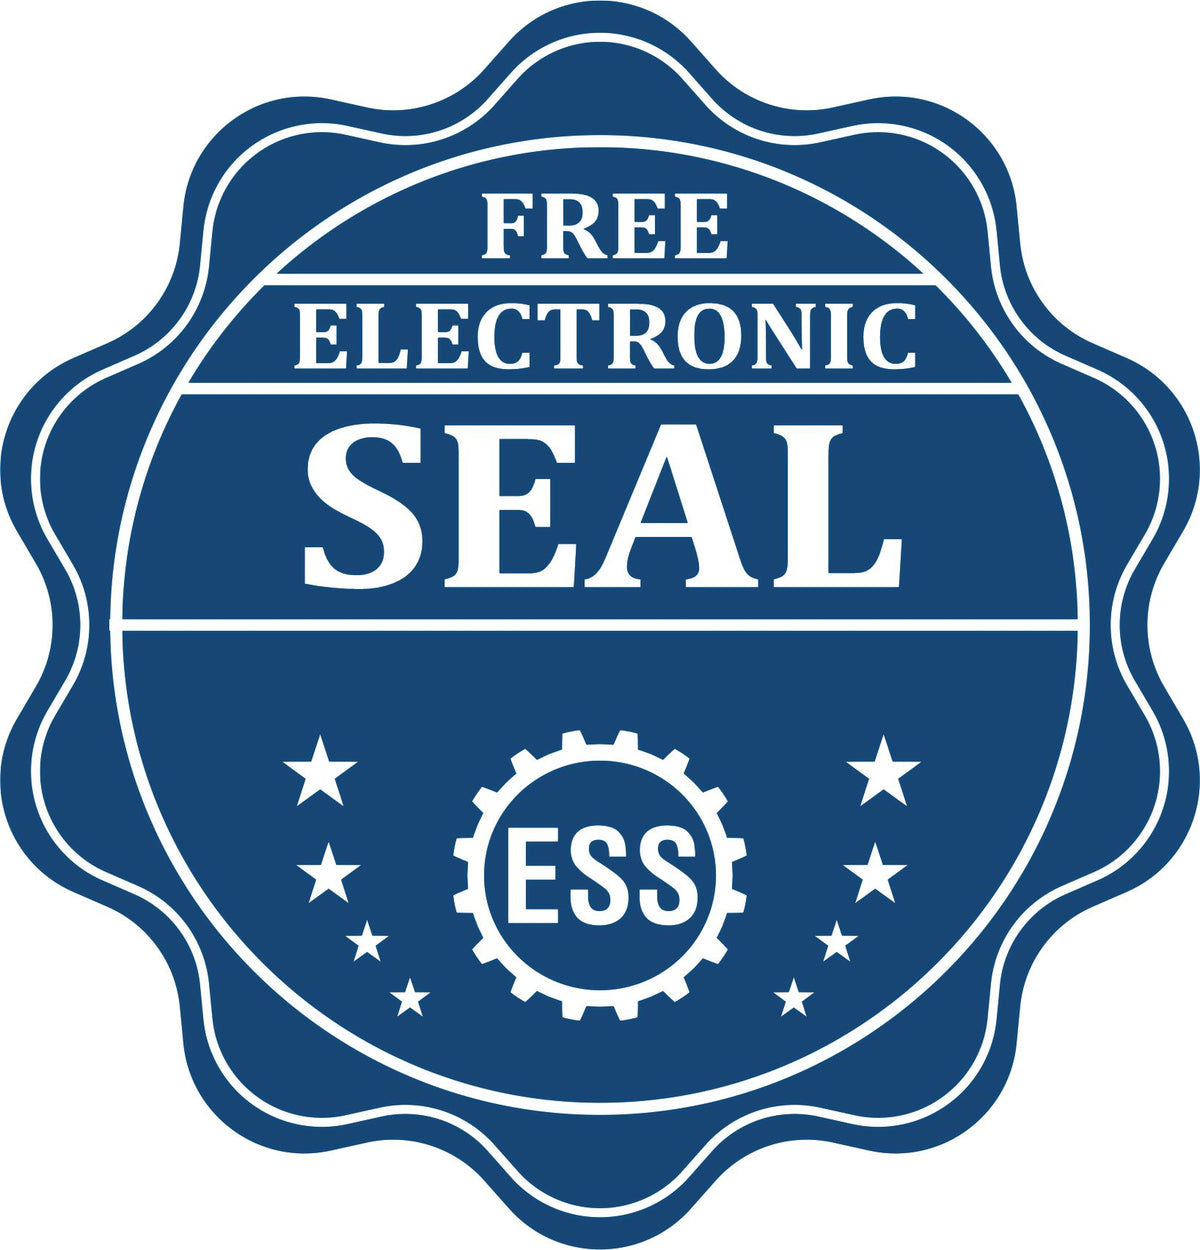 A badge showing a free electronic seal for the Hybrid Kansas Landscape Architect Seal with stars and the ESS gear on the emblem.